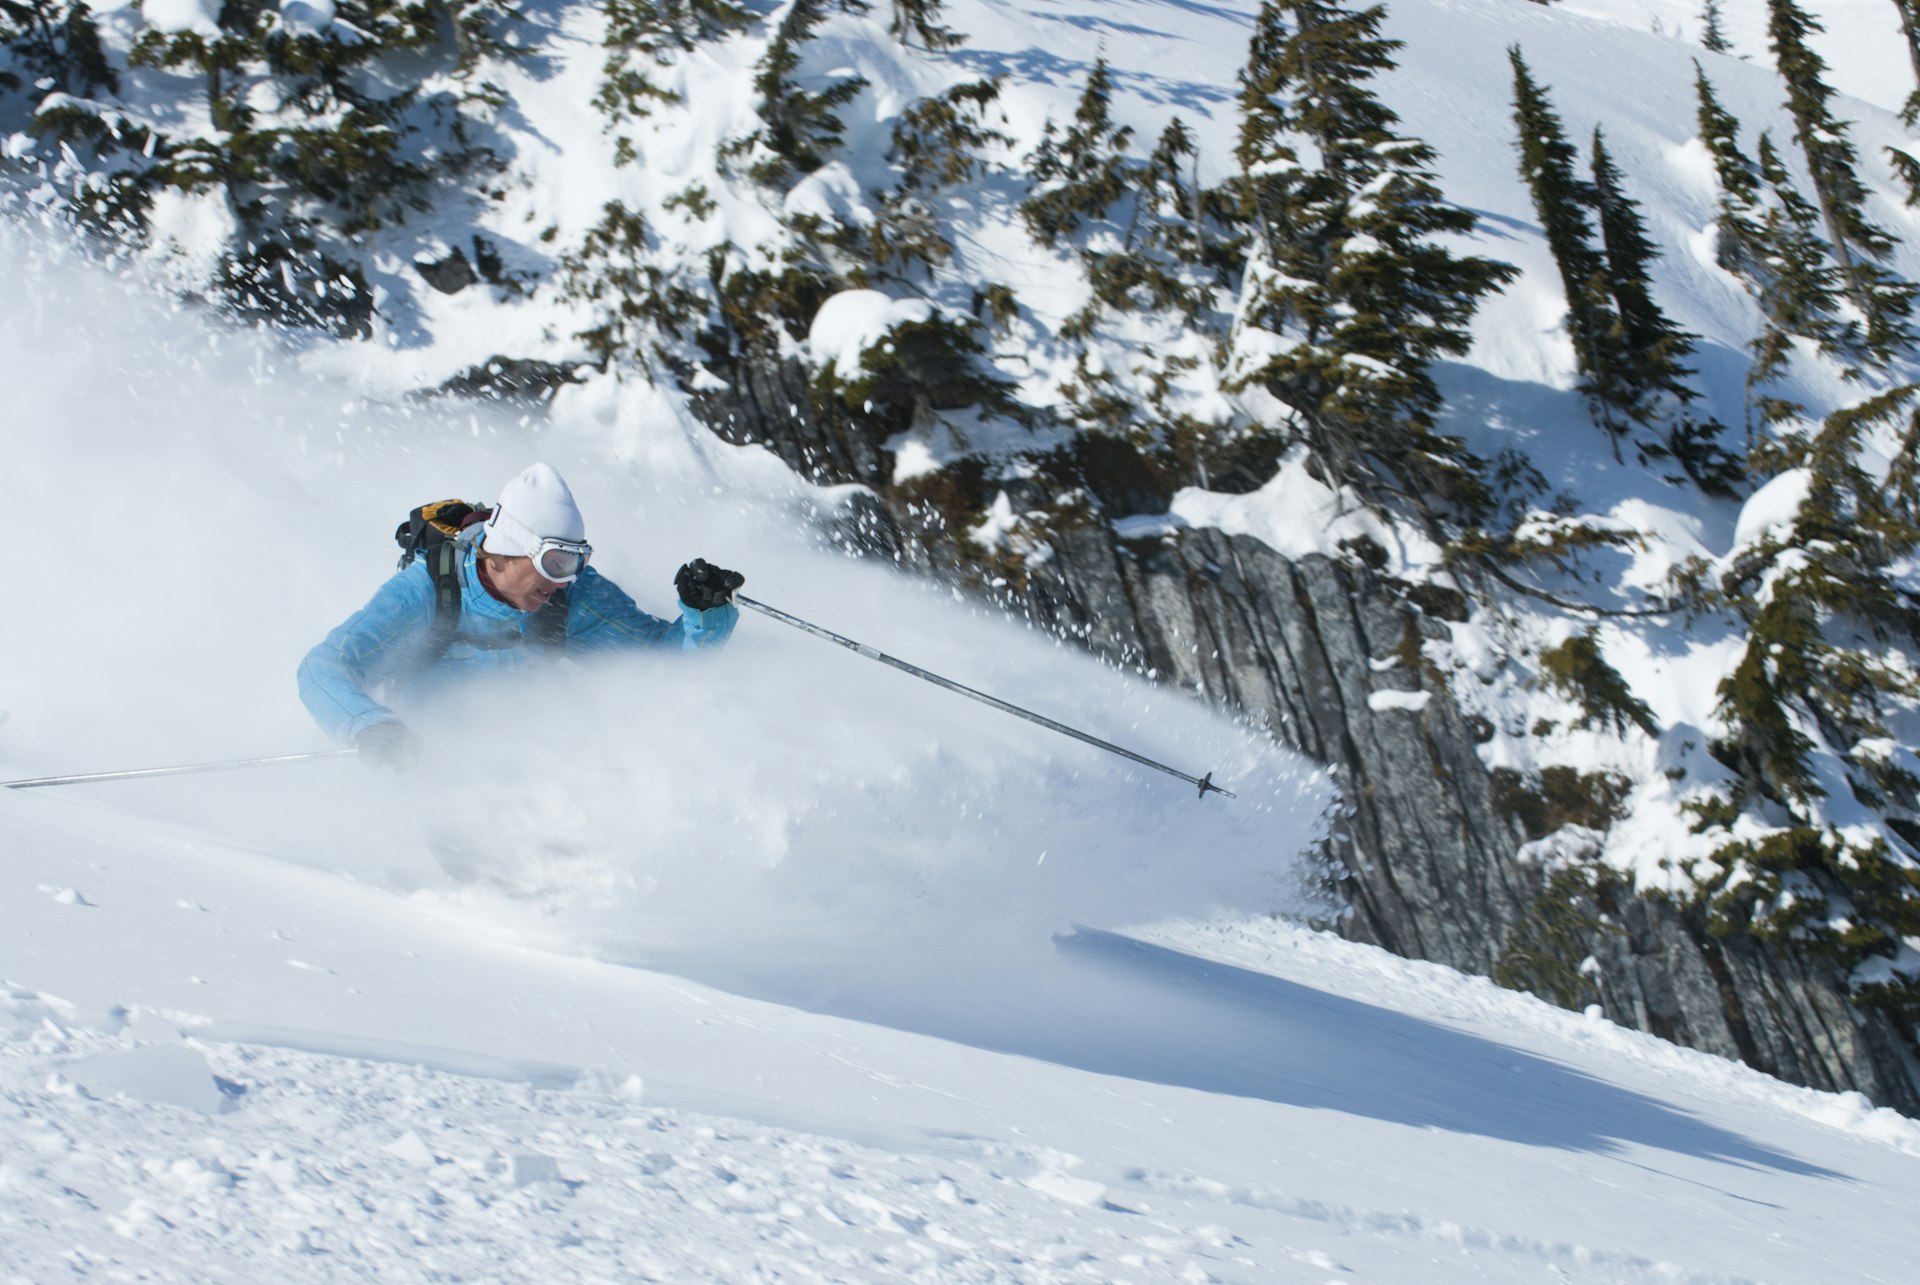 A skier making a turn in fluffy powder snow, Whistler, British Columbia, Canada